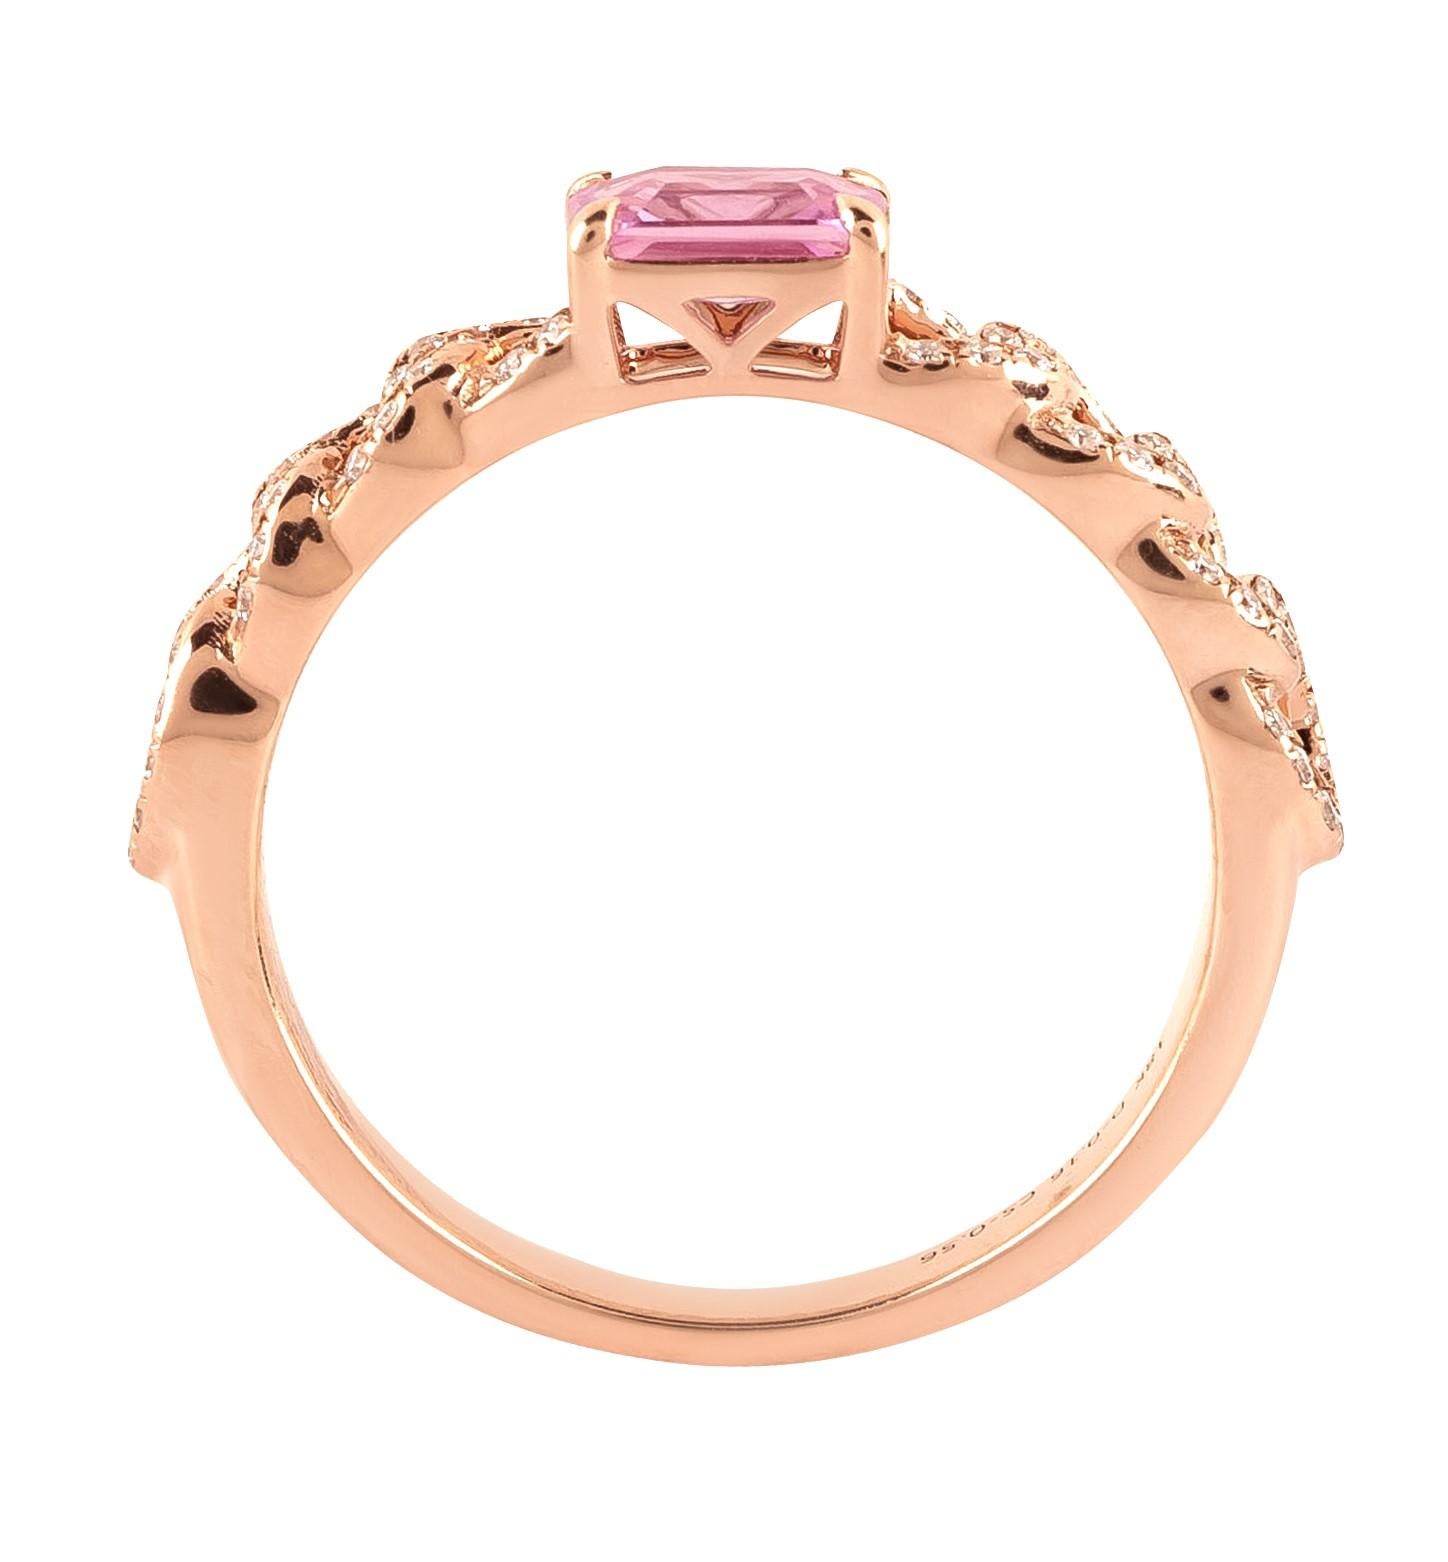 Women's 18 Karat Gold 0.78 Carat Diamond and Pink Sapphire Cocktail Ring  For Sale